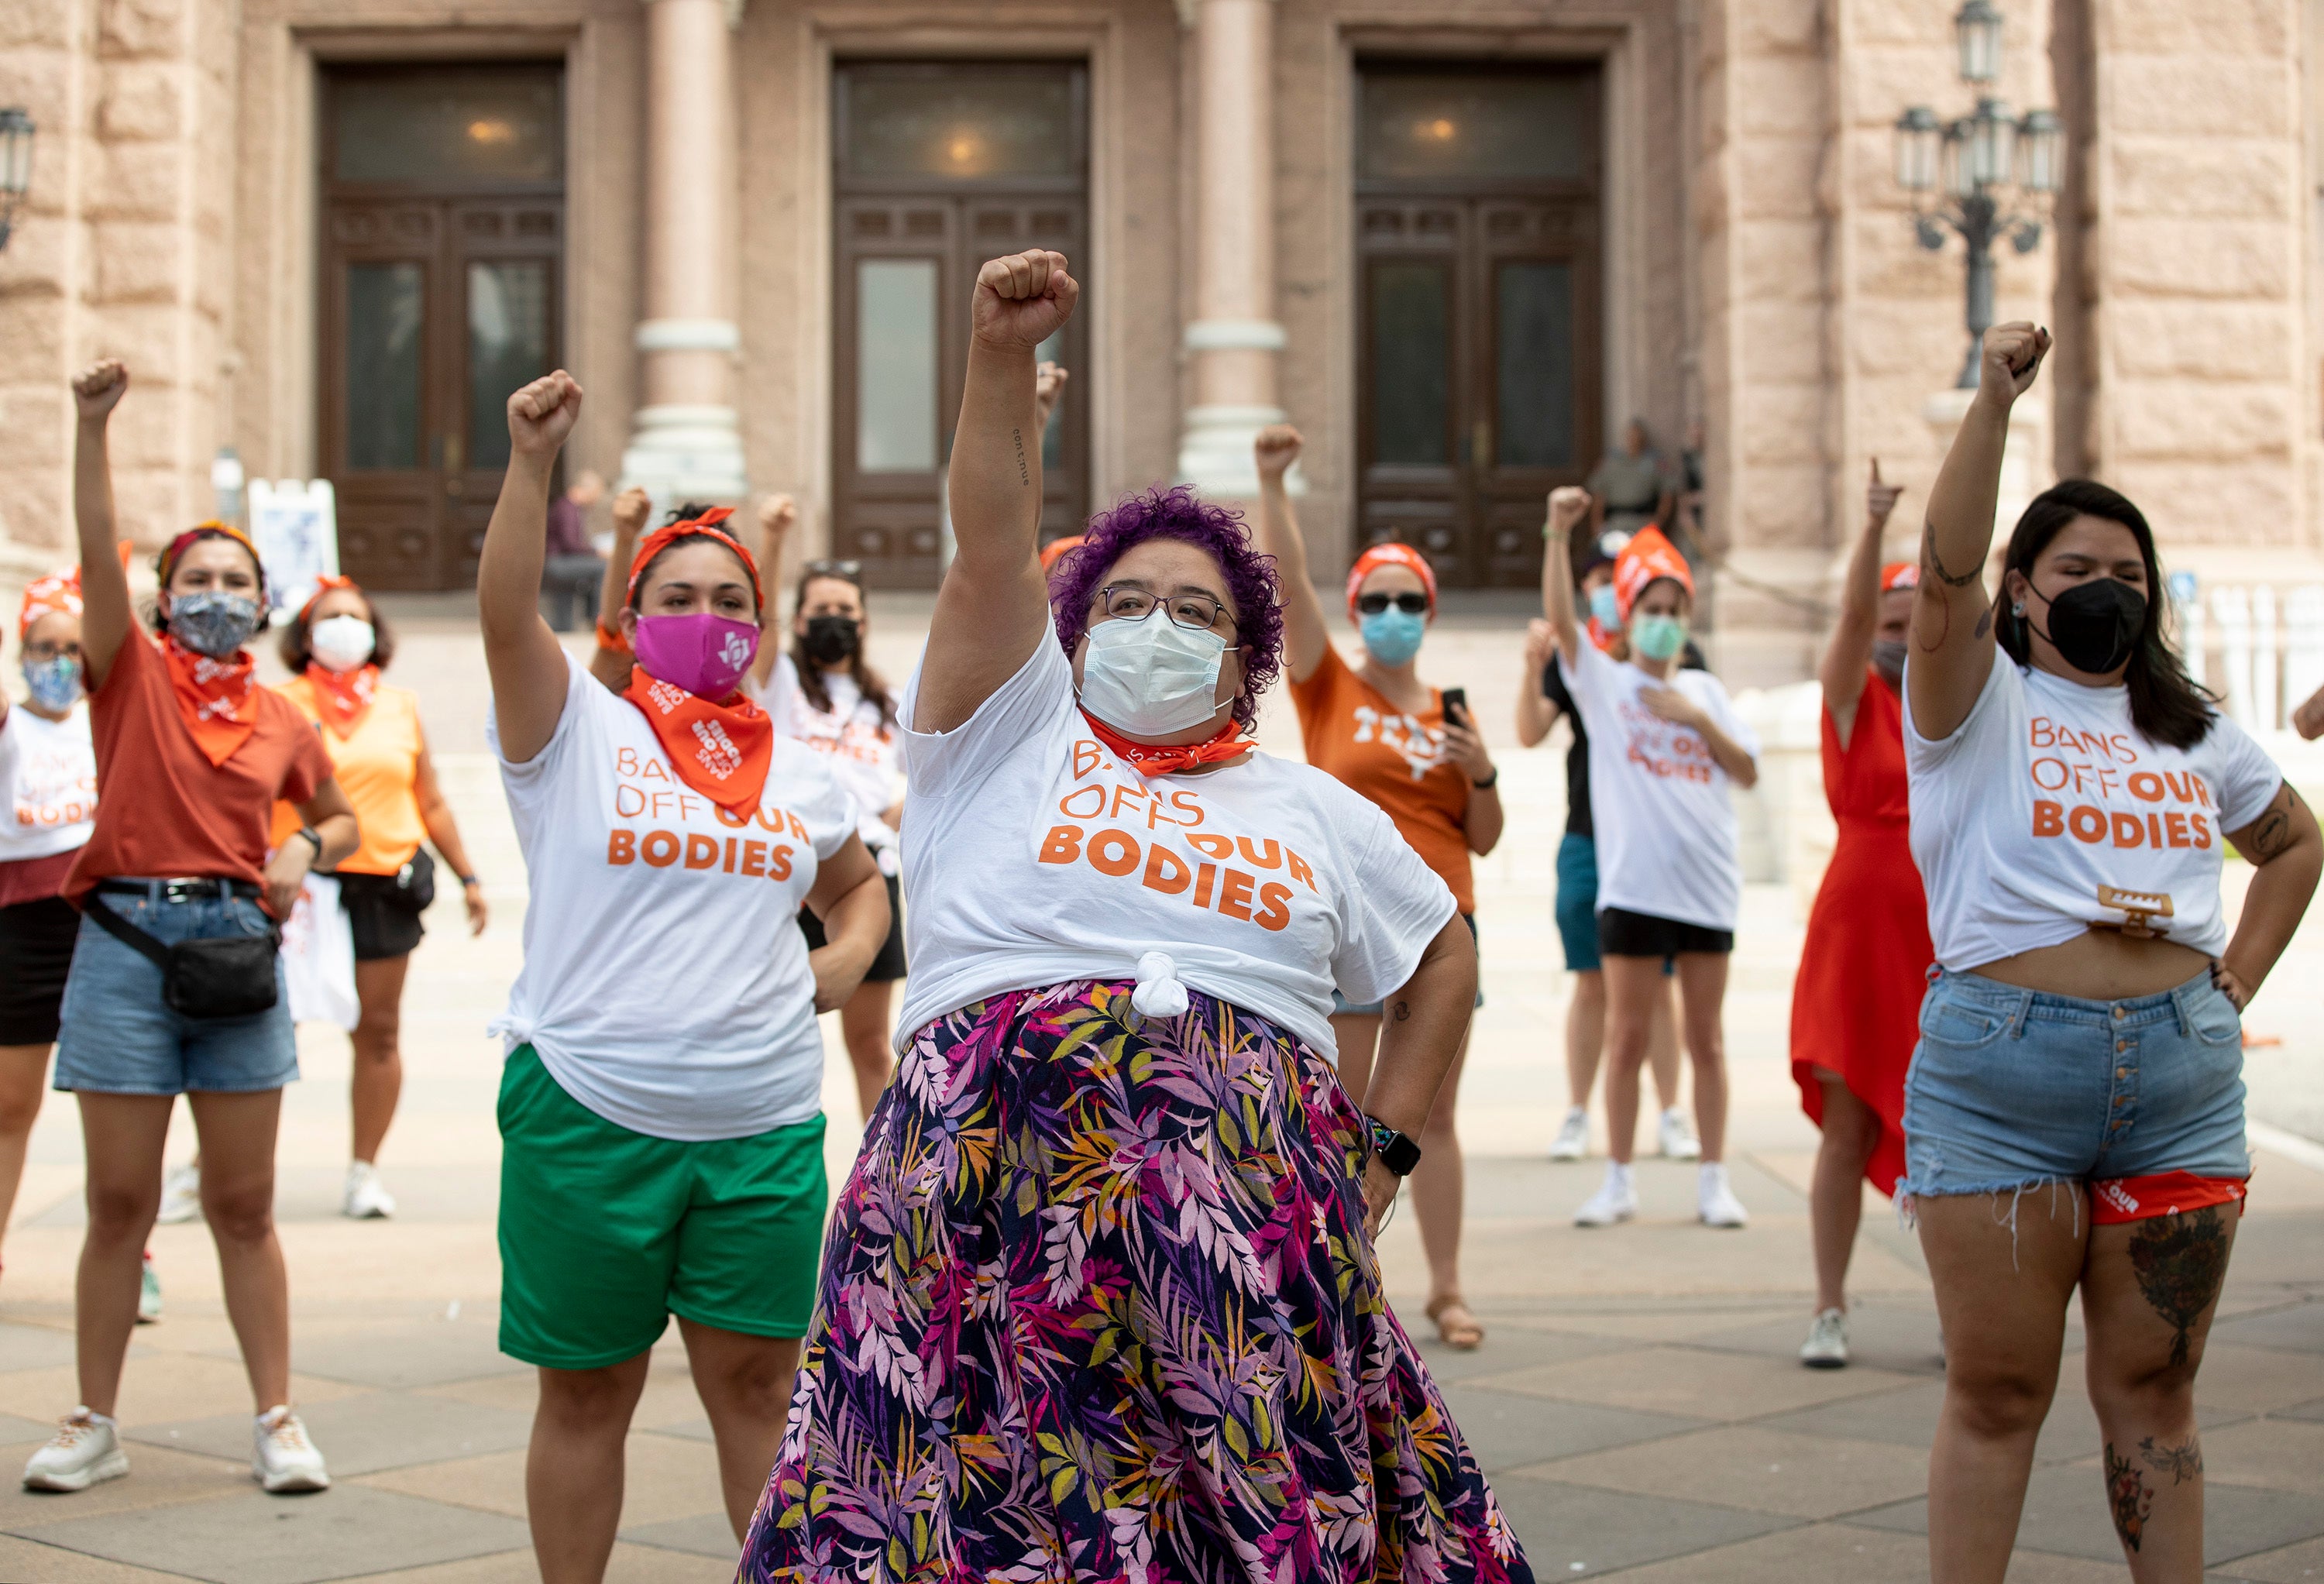 Women protested against the restrictive Texas abortion law